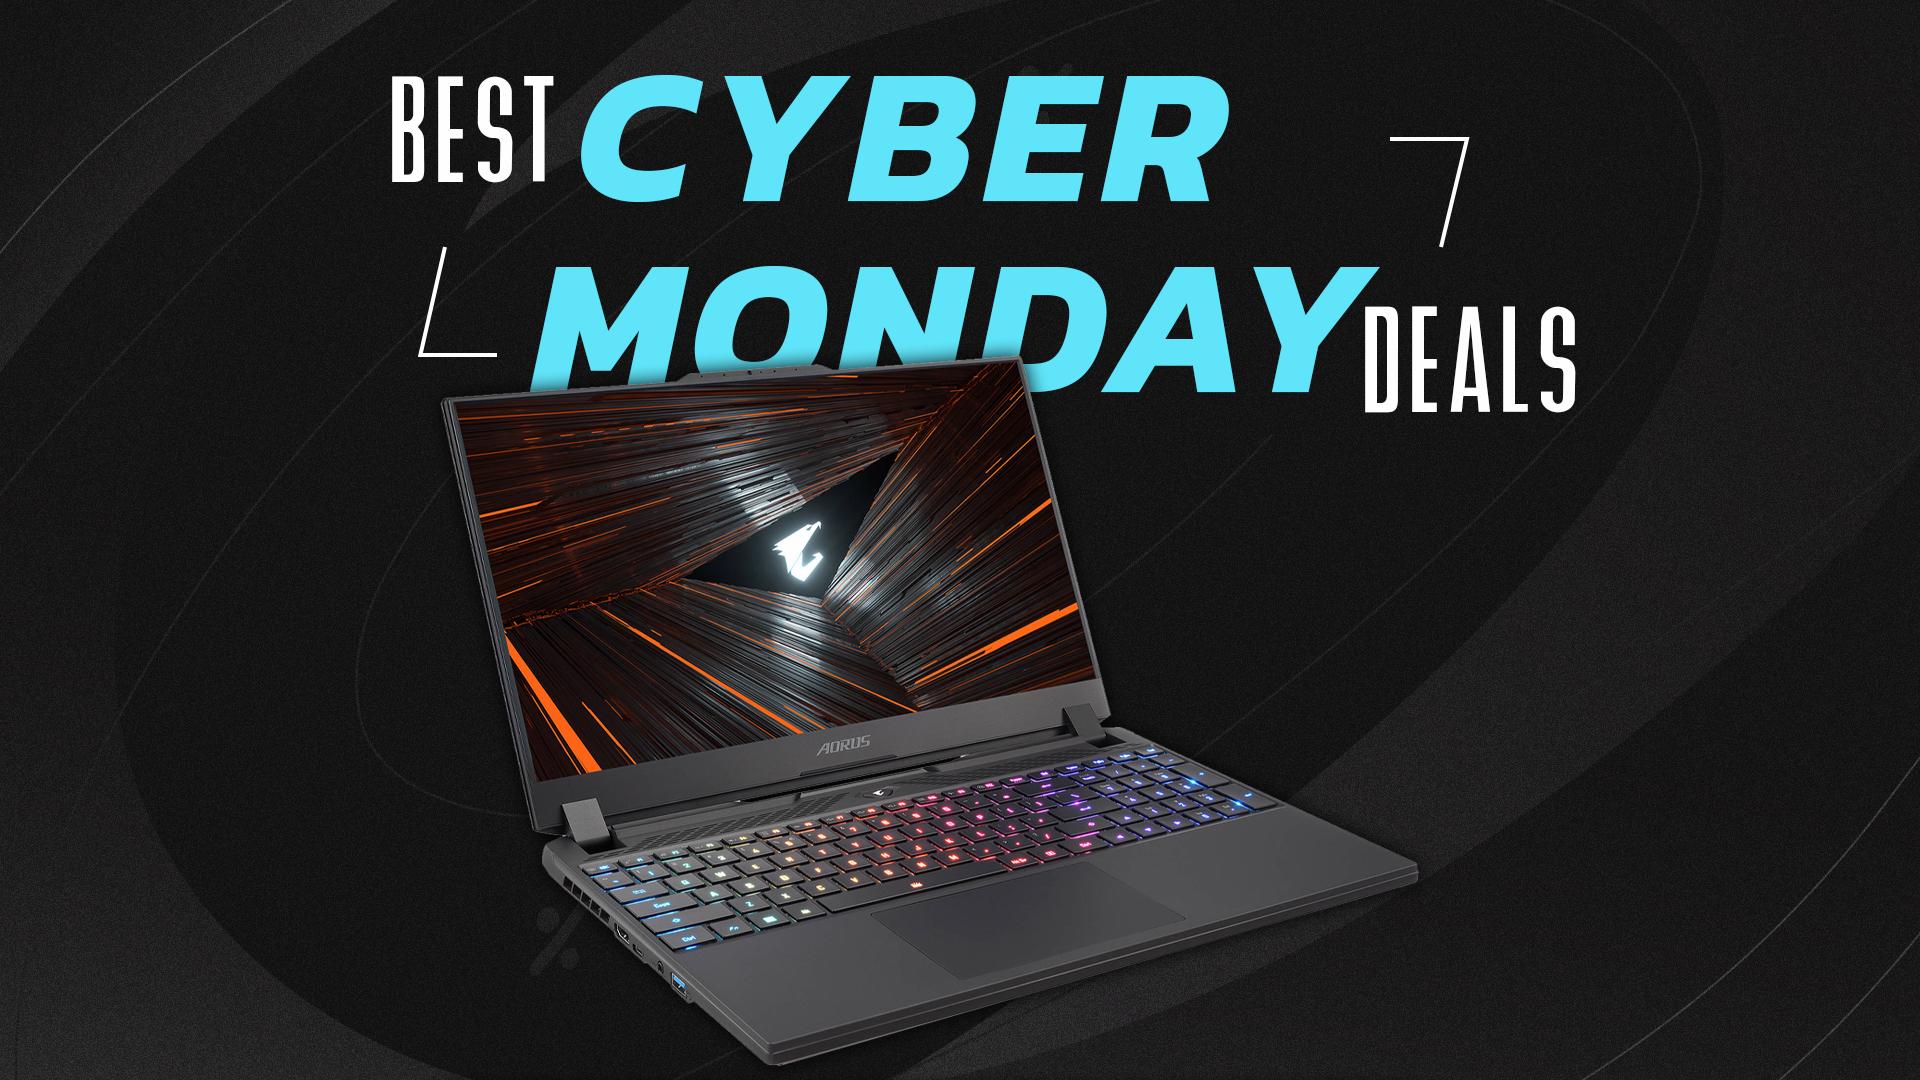 The Best Cyber Monday Laptop Deals for Gaming: Dell, Alienware, HP